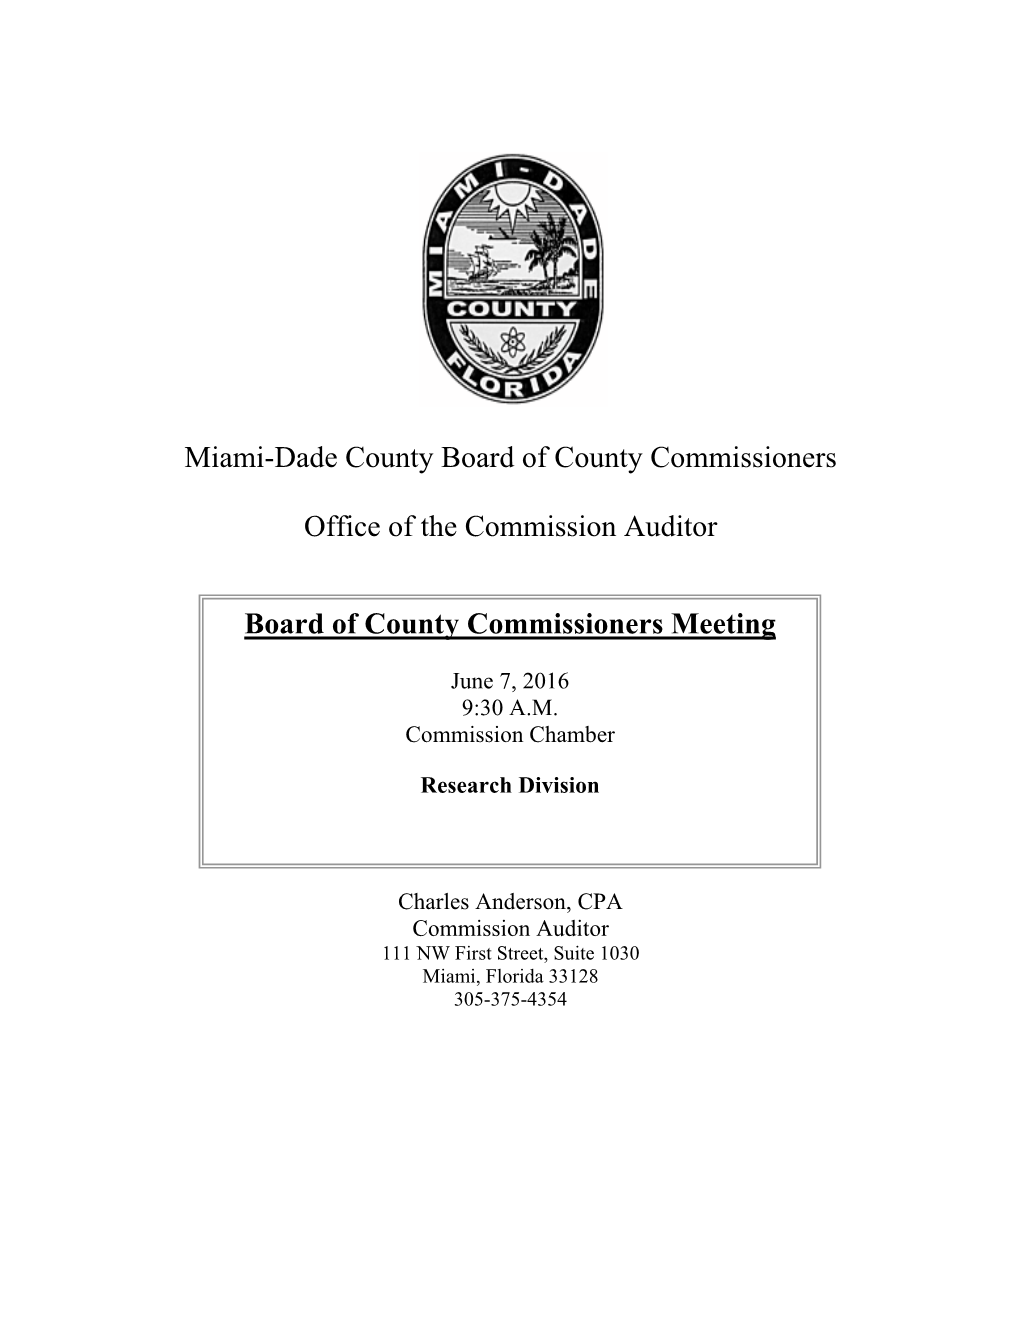 Miami-Dade County Board of County Commissioners Office of the Commission Auditor Board of County Commissioners Meeting